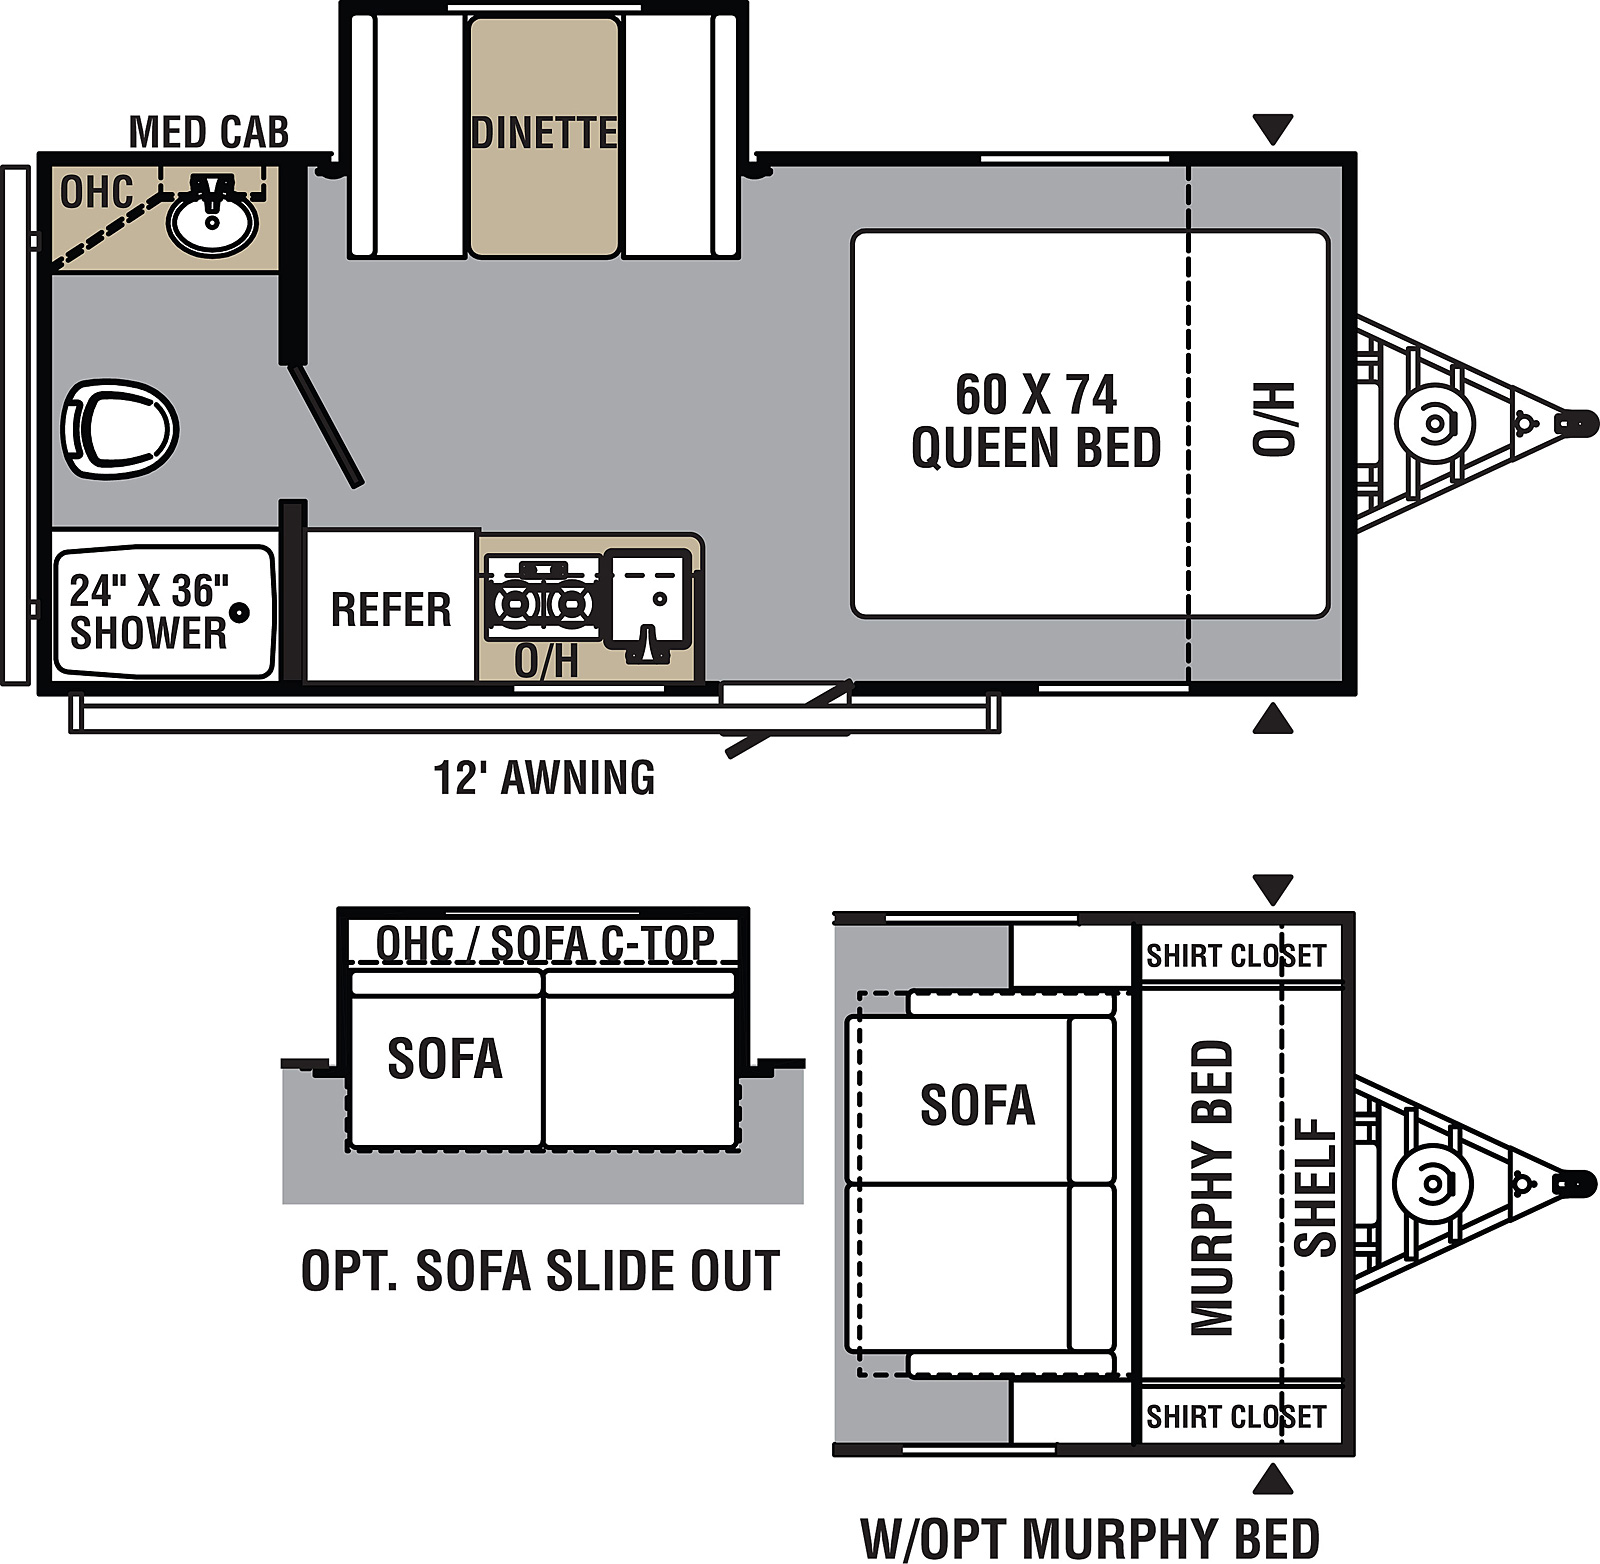 Viking Ultra-Lite 17FQS floorplan. The 17FQS has one slide out and one entry door.